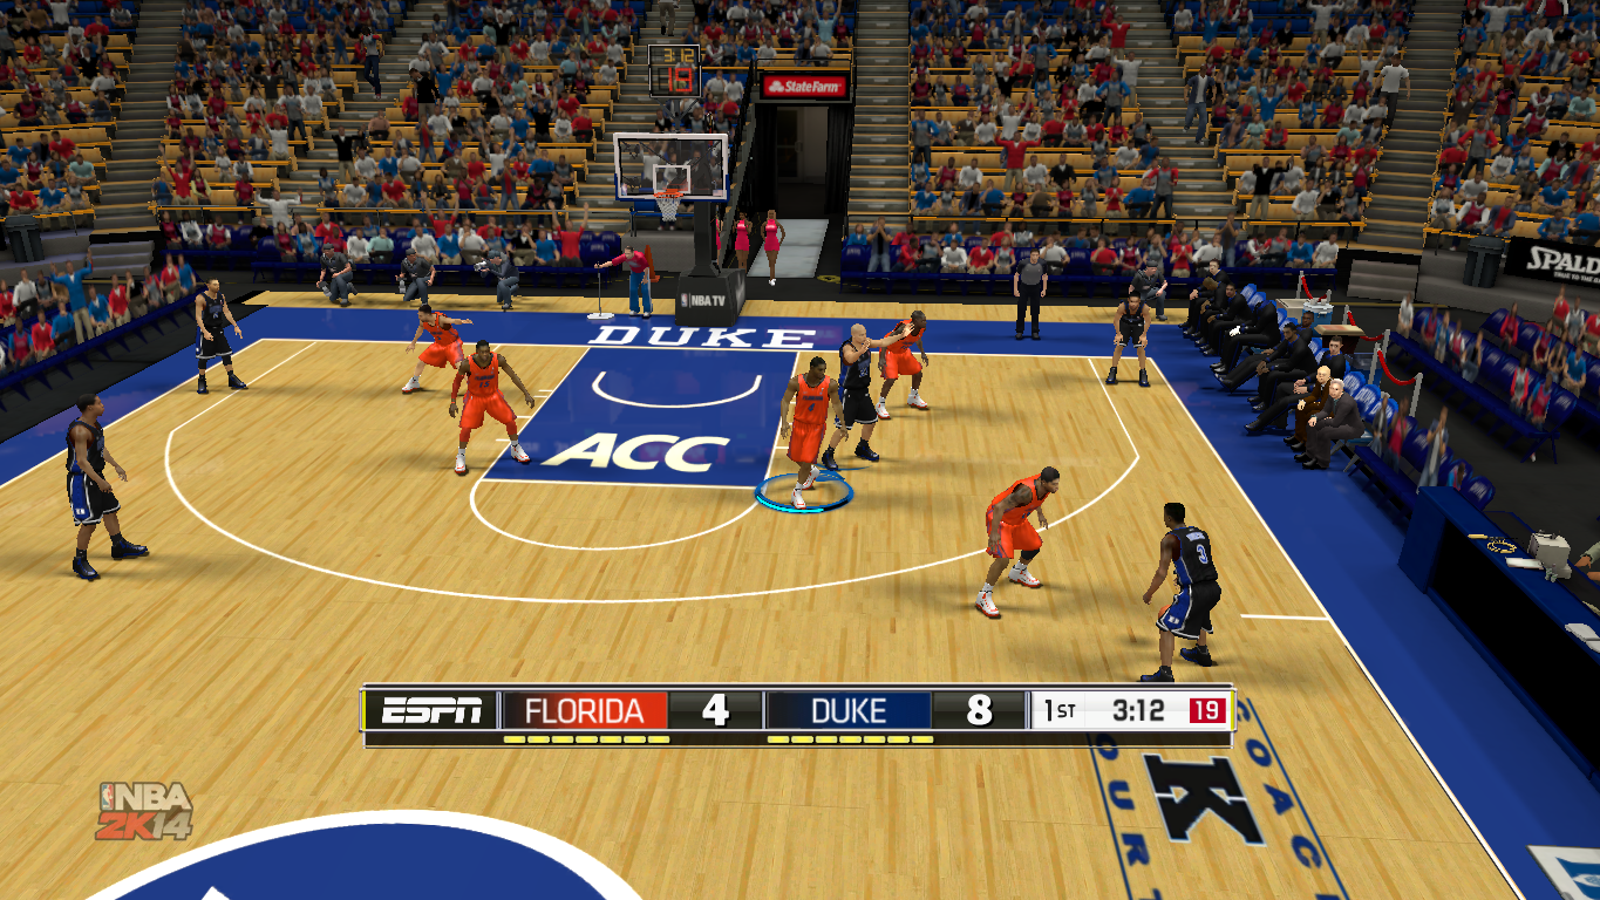 Modders Keep College Basketball Alive with 'March Madness 2K14' on PC1600 x 900